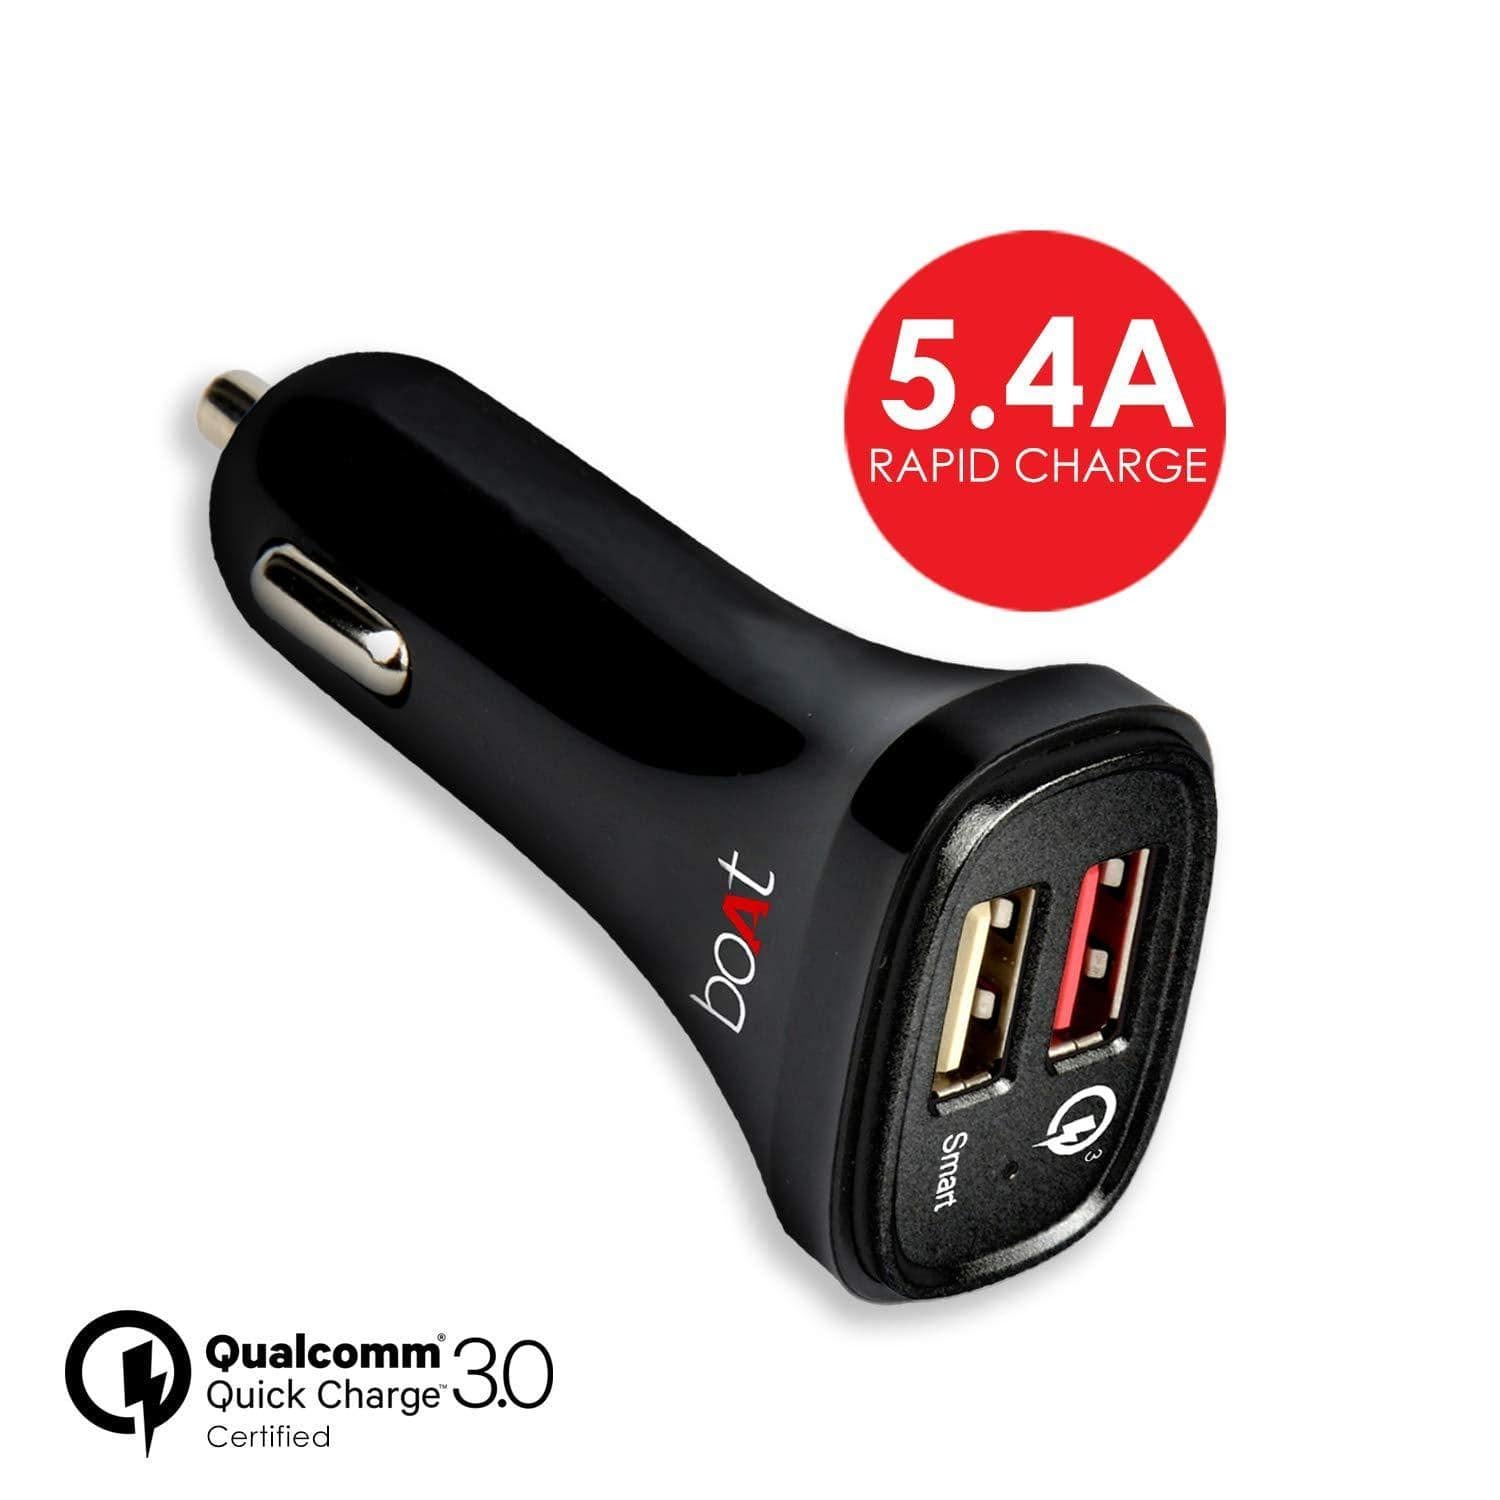 boAt Dual Port Rapid Car Charger (Qualcomm Certified) Smart Charging with Quick Charge 3.0 (Black) (Without Cable)-Car charger-dealsplant